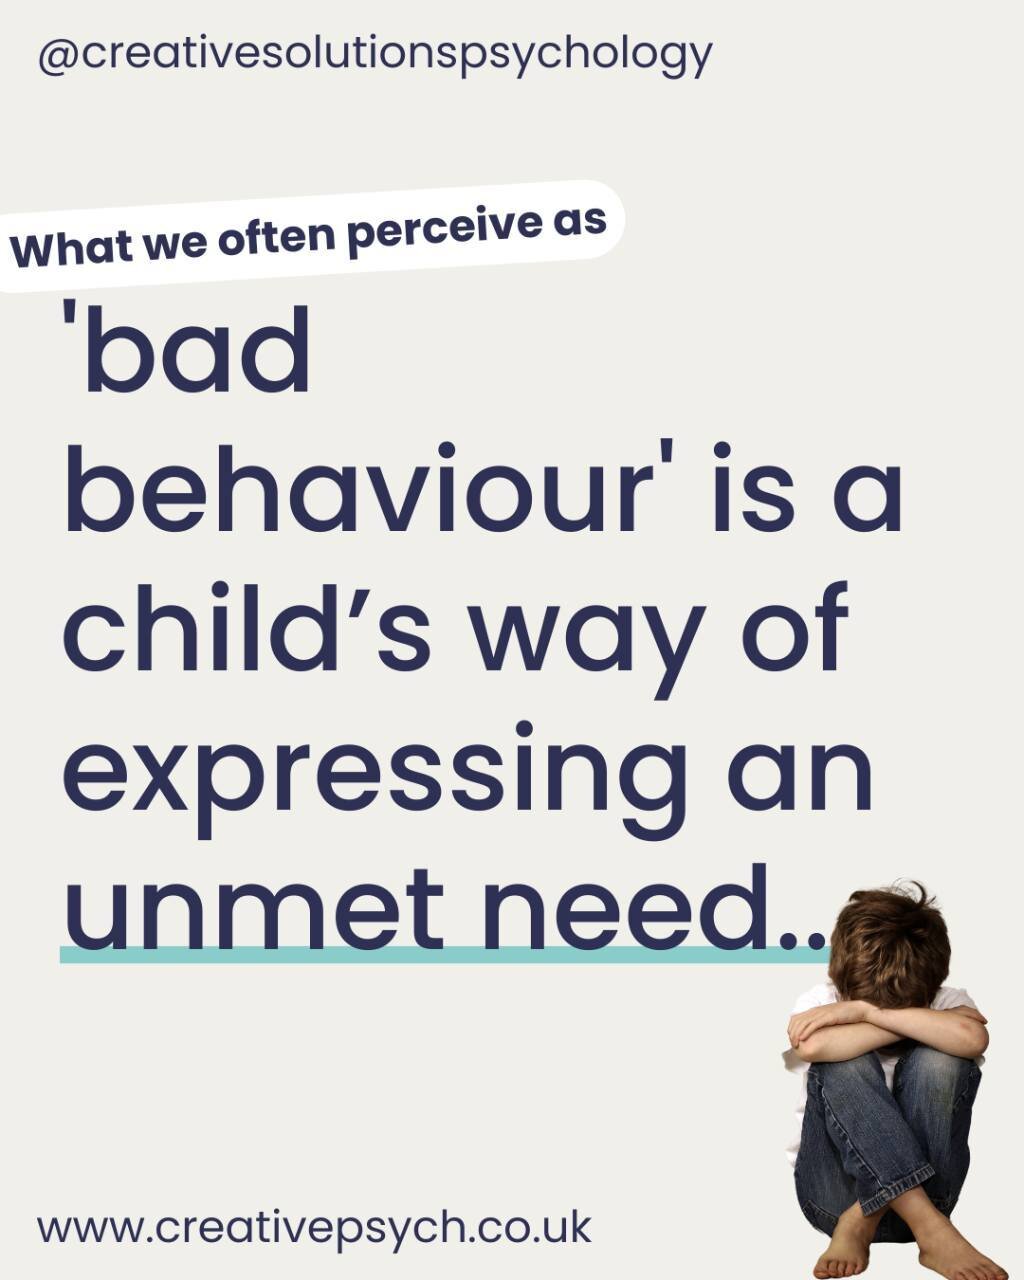 As parents and educators, it's common to label certain actions of children as 'bad behaviour'. 

However, this perspective oversimplifies and misinterprets children's ways of expressing unmet needs.

Behaviour that we often categorise as 'bad' - like